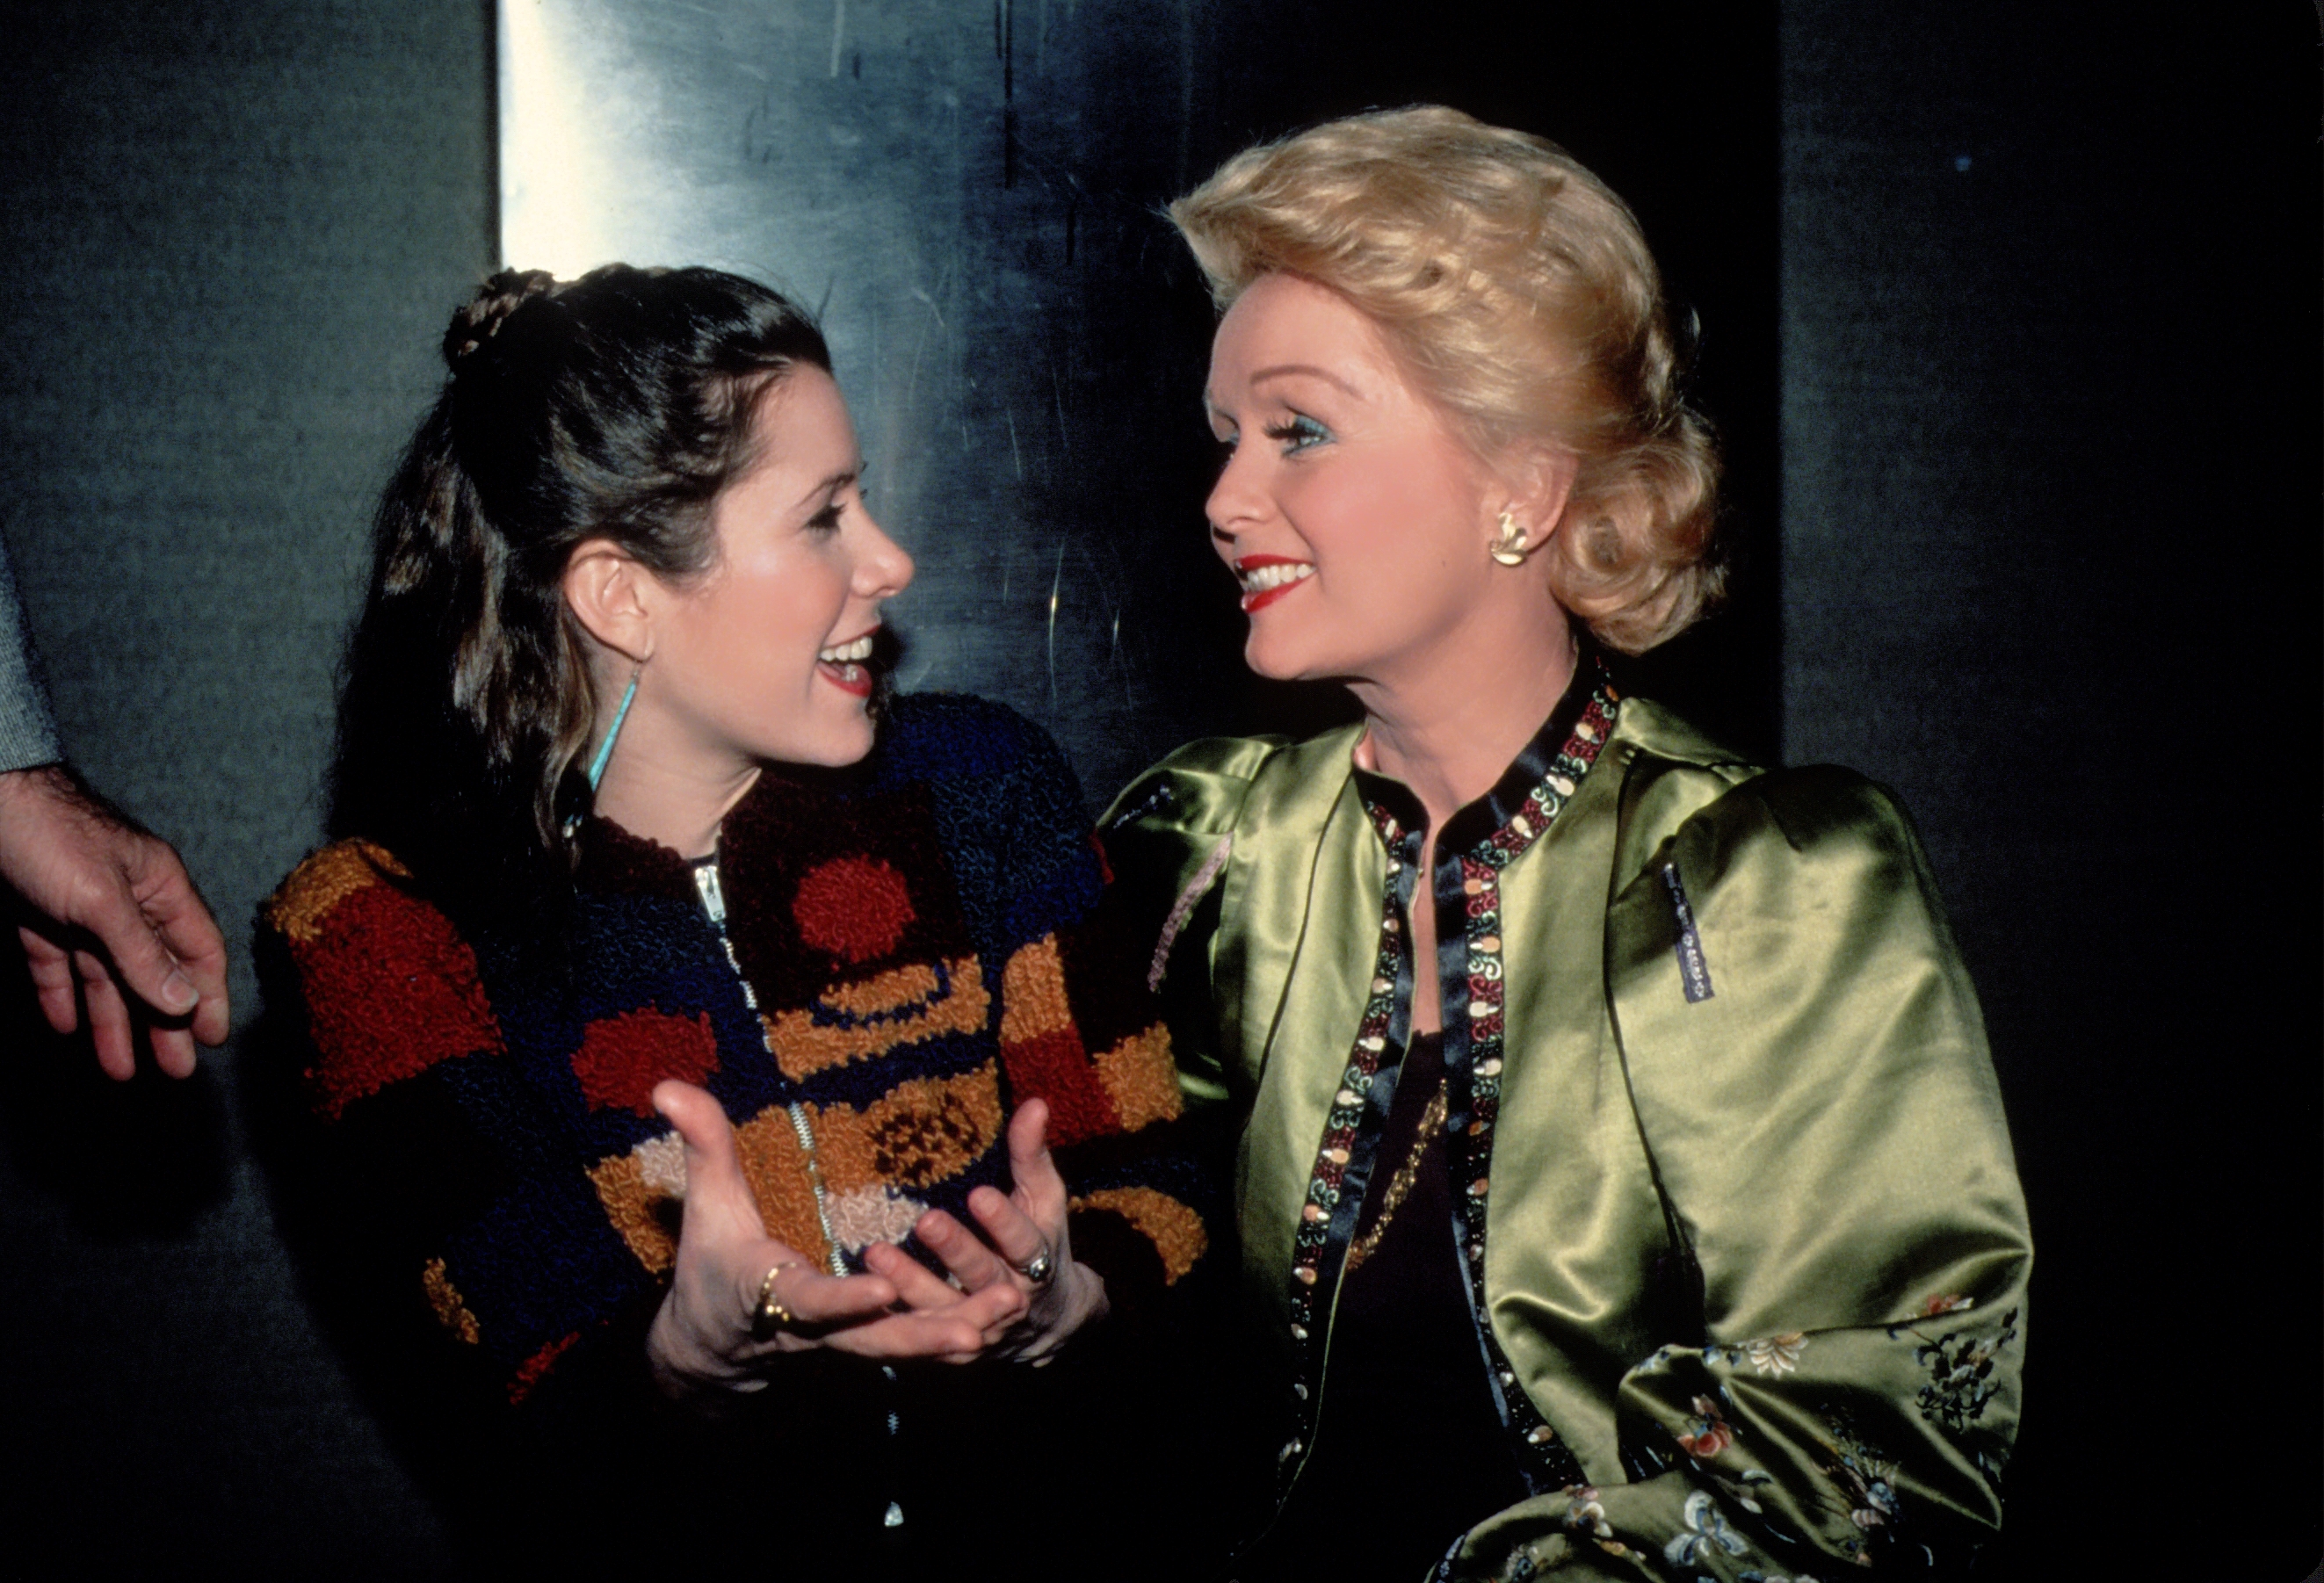 Carrie Fisher and Debbie Reynolds, circa 1983, New York City | Source: Getty Images